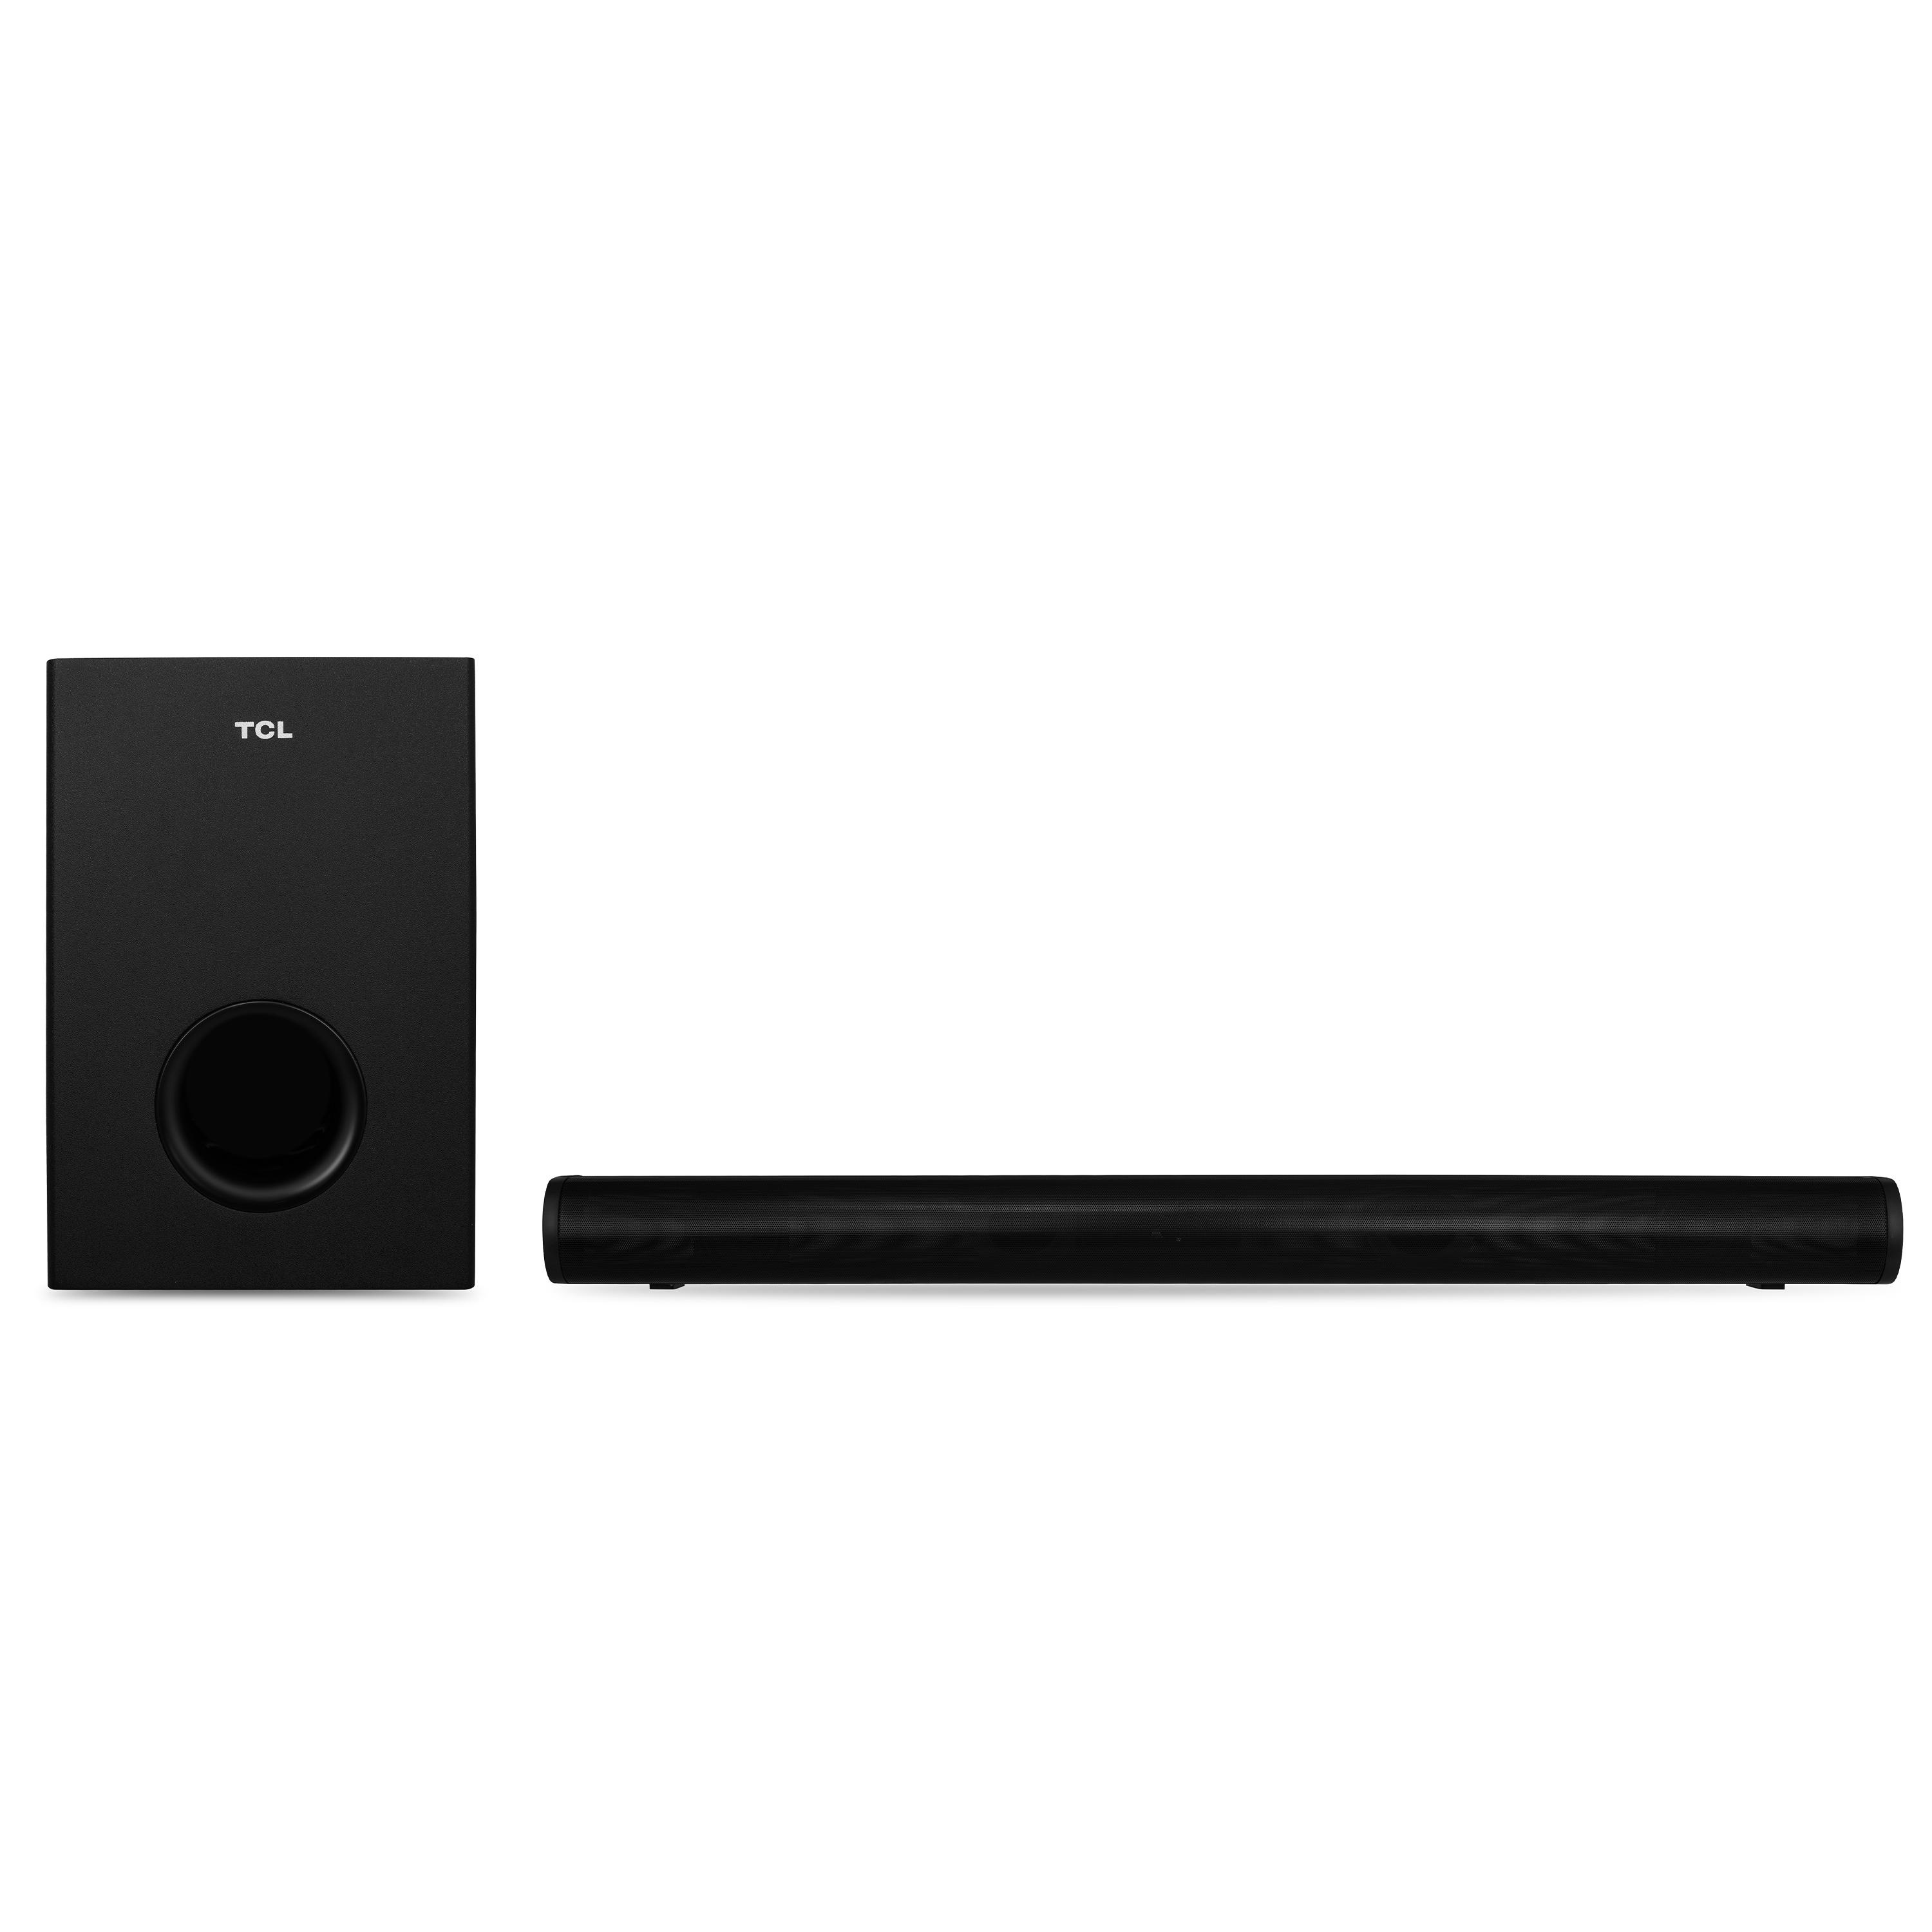 TCL Alto 5+ 2.1 Channel Home Theater Sound Bar with Wireless Subwoofer, Bluetooth 5.0, 31.8 inch, Black - S522W - image 2 of 5